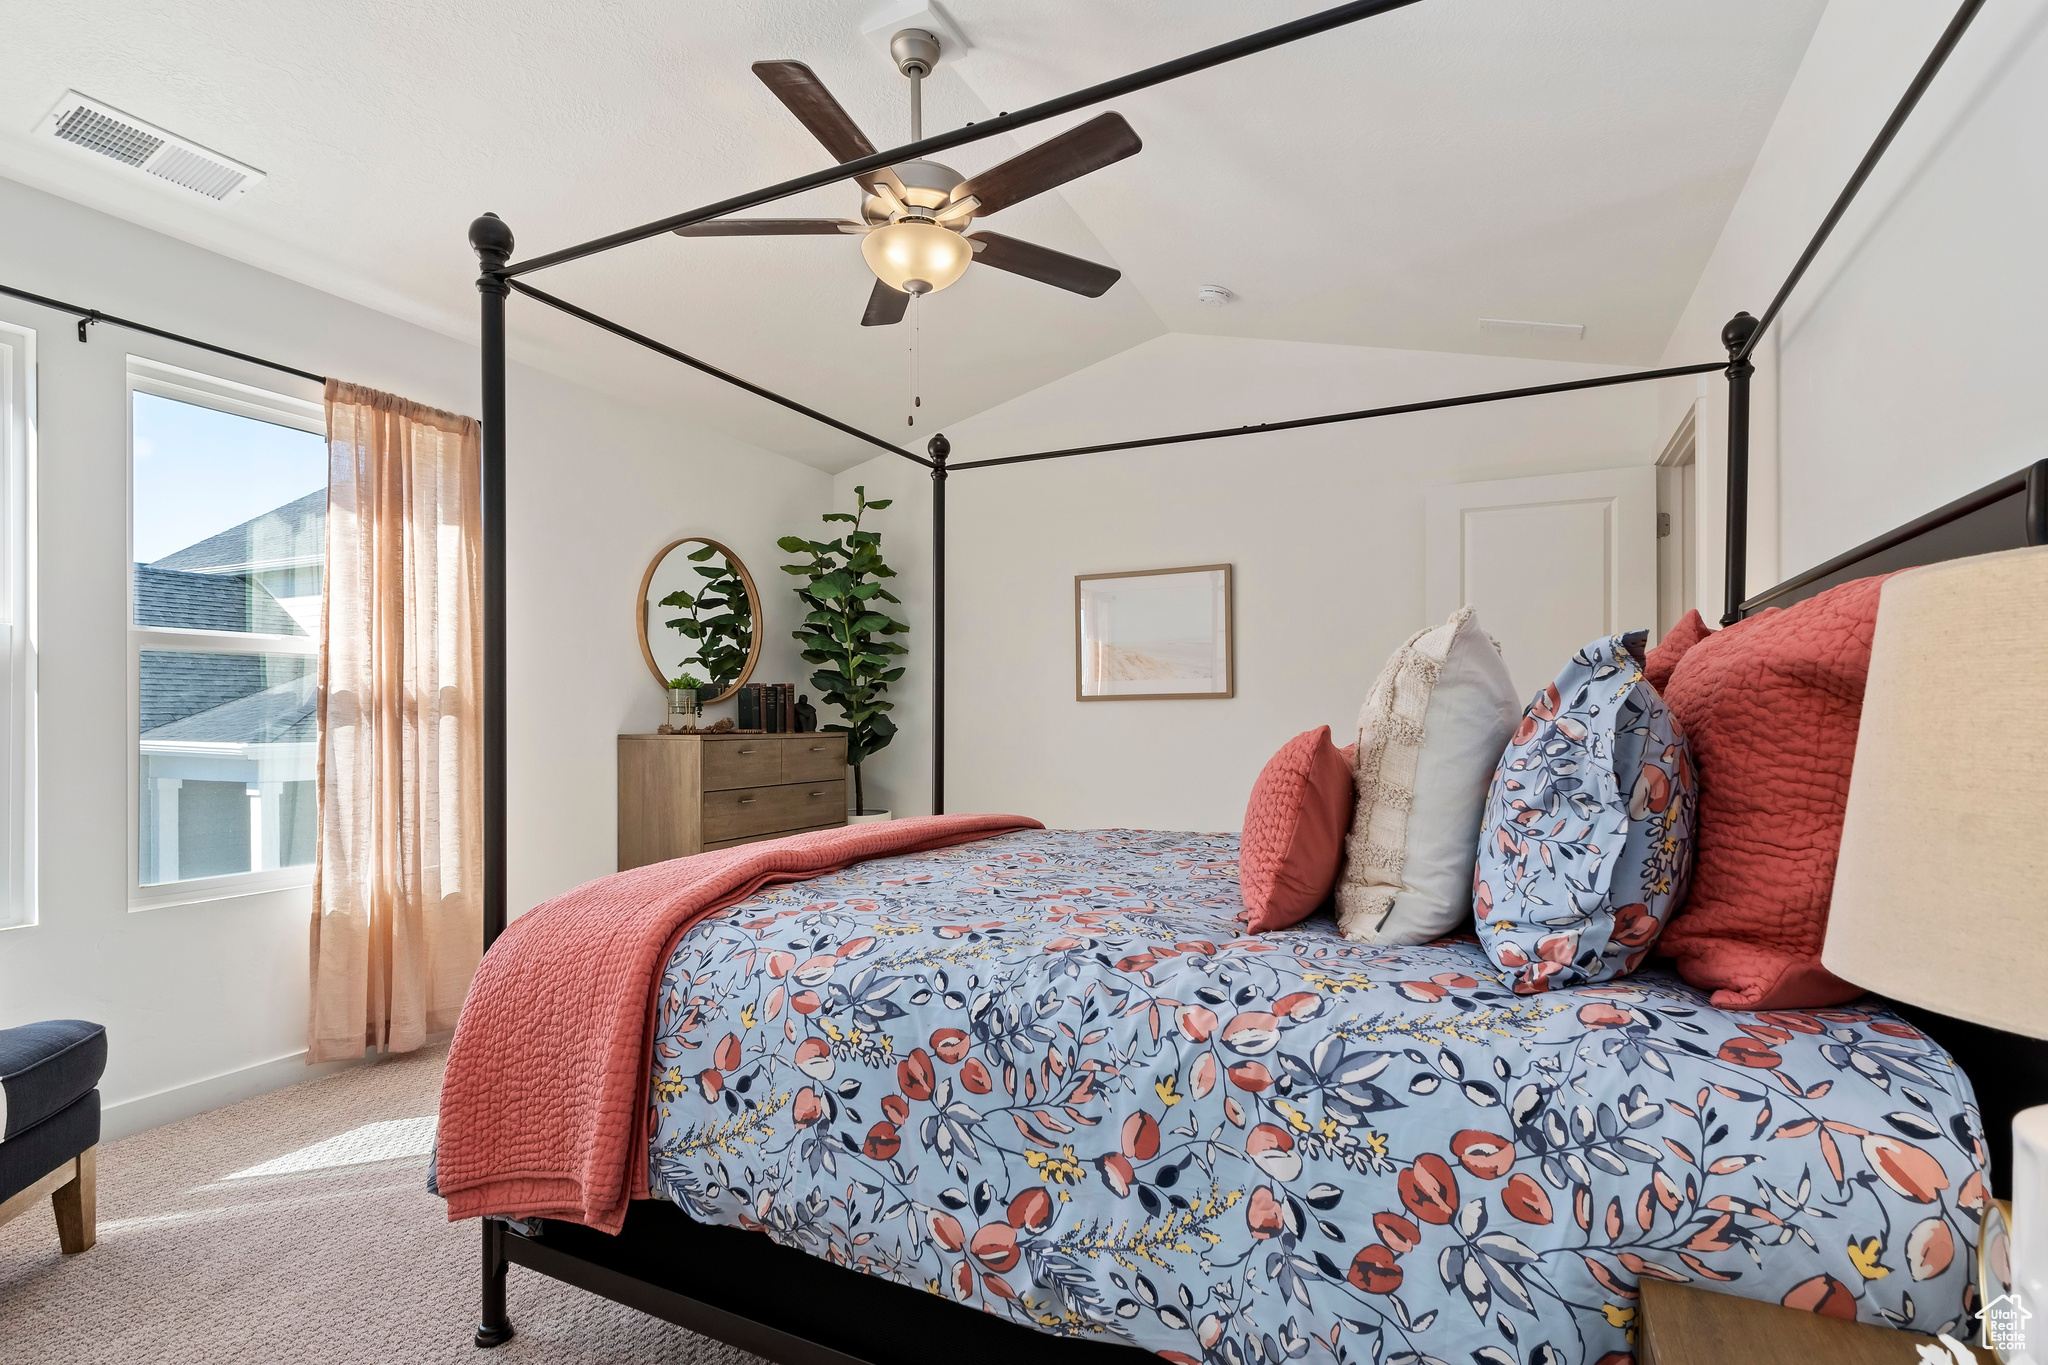 Carpeted bedroom featuring vaulted ceiling, ceiling fan, and multiple windows